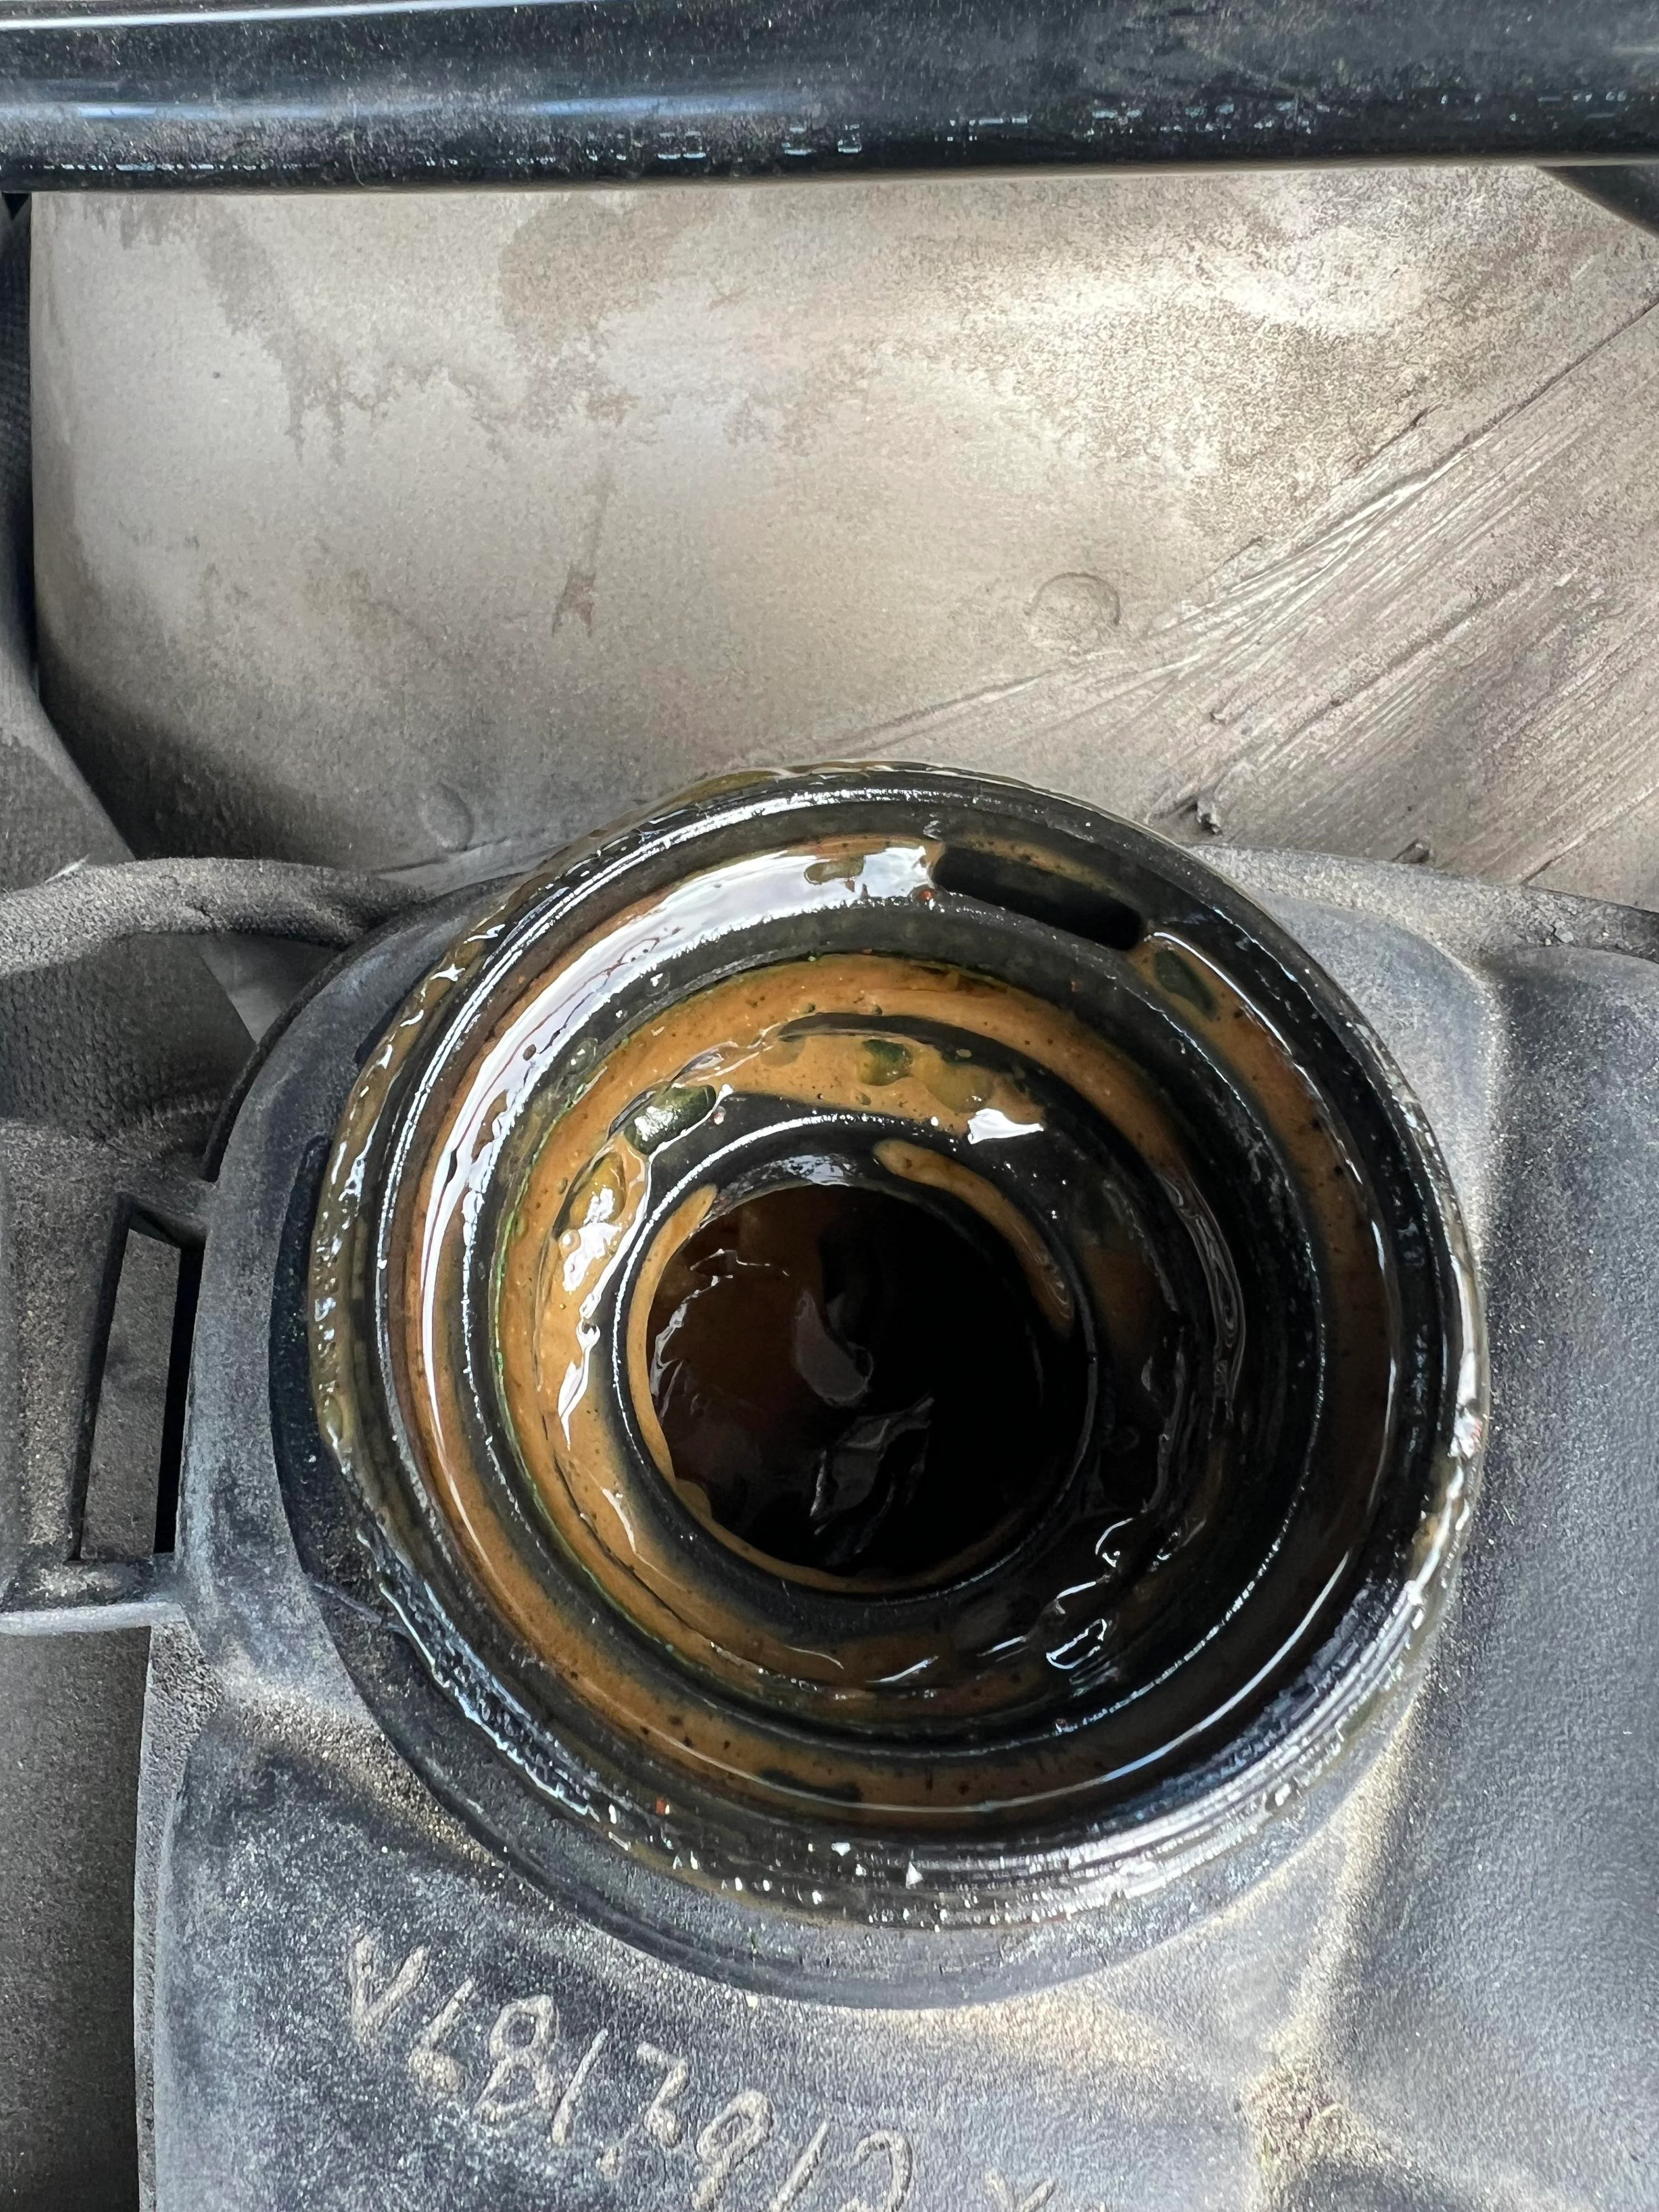 Can I Drive With Oil In Coolant?